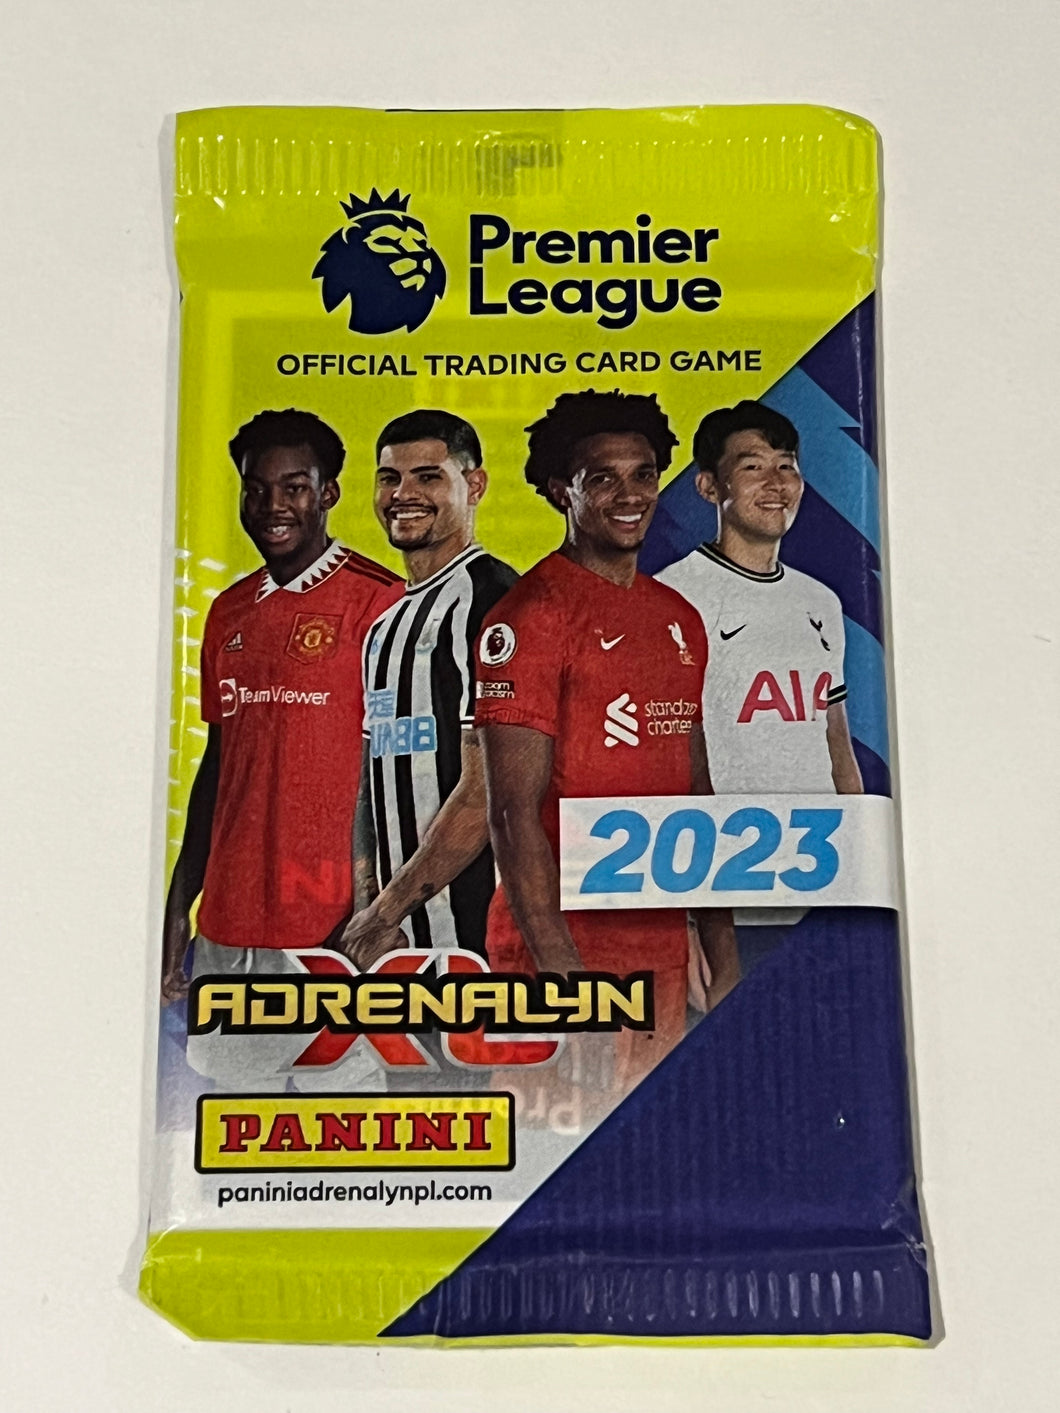 Premier League Adrenalyn XL 2023 official trading card pack (6 cards per pack)